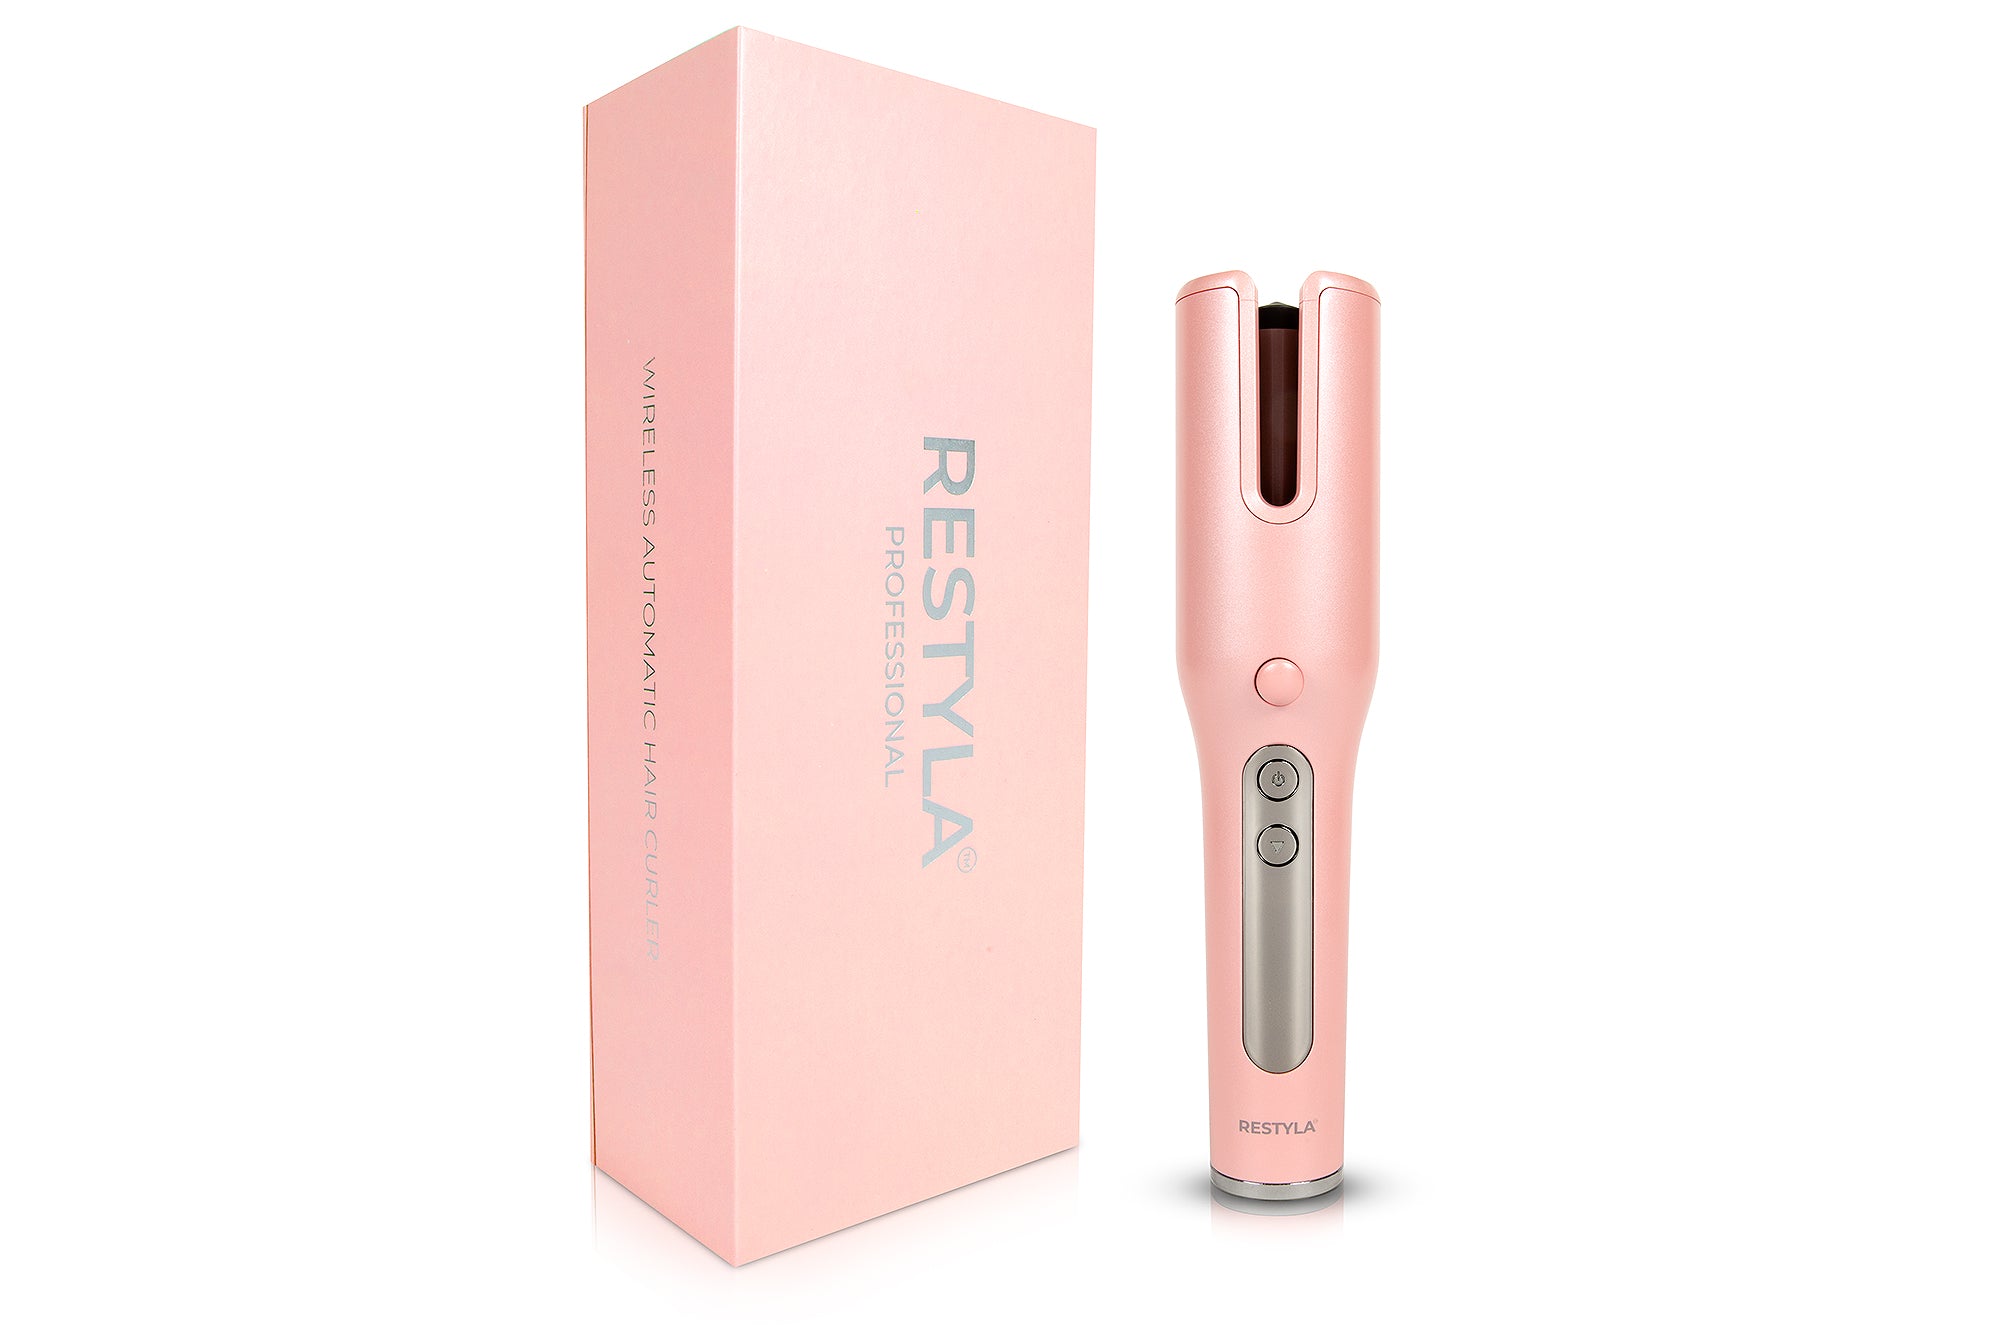 Perfect Touch Wireless Hair Curler – RoyaleUSA